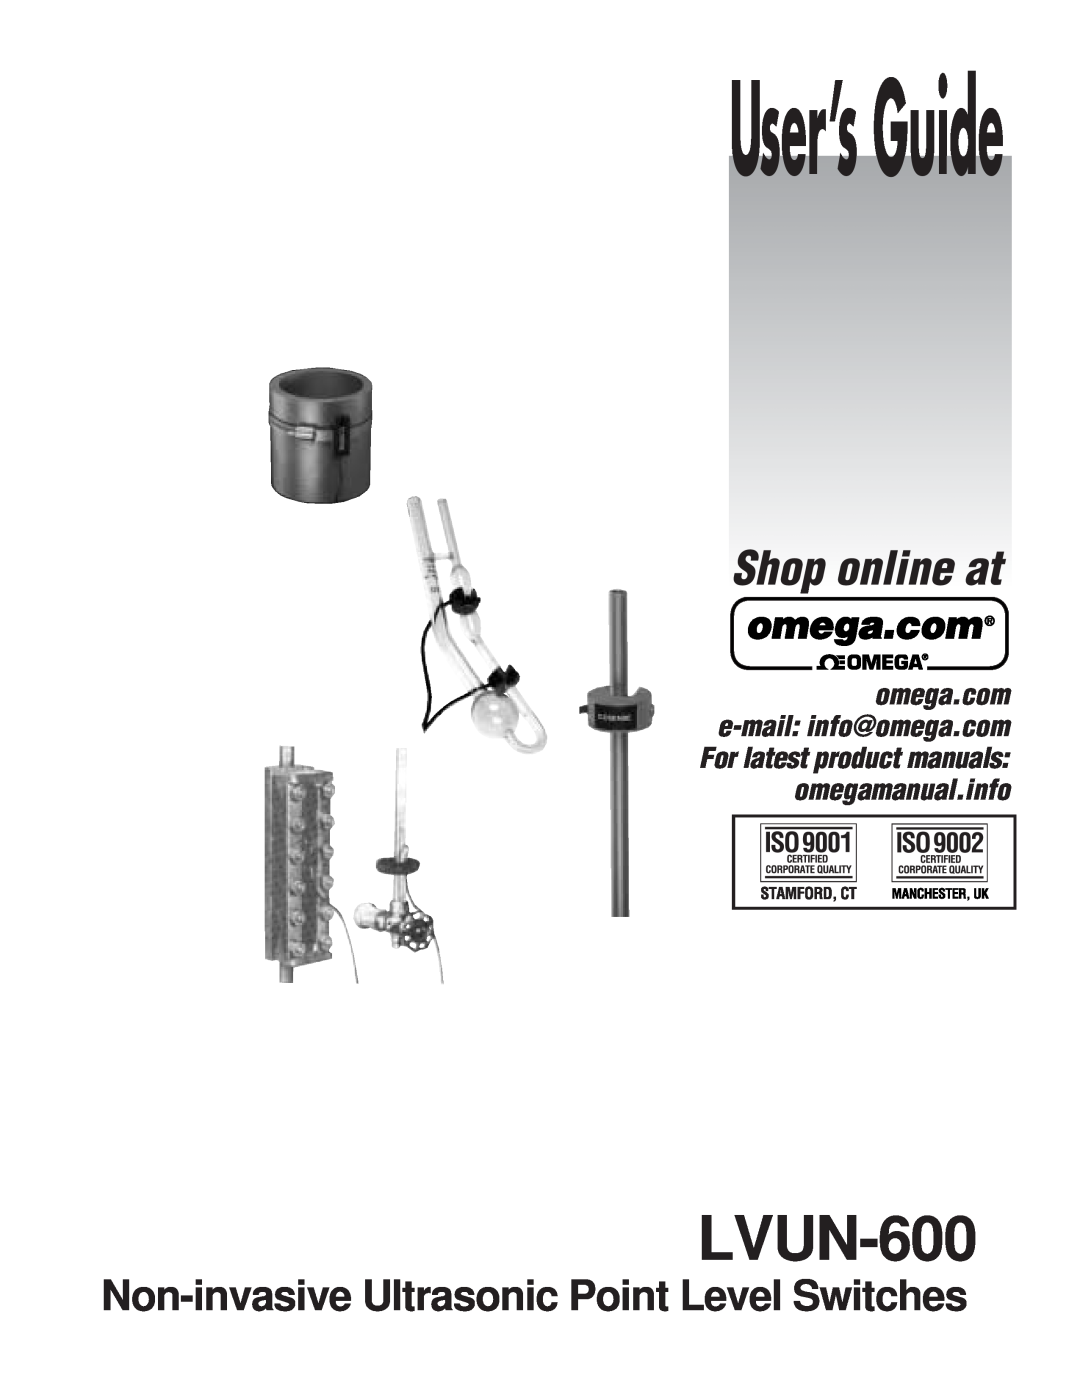 Omega Vehicle Security LVUN-600 manual User’s Guide, Shop online at, Non-invasive Ultrasonic Point Level Switches 